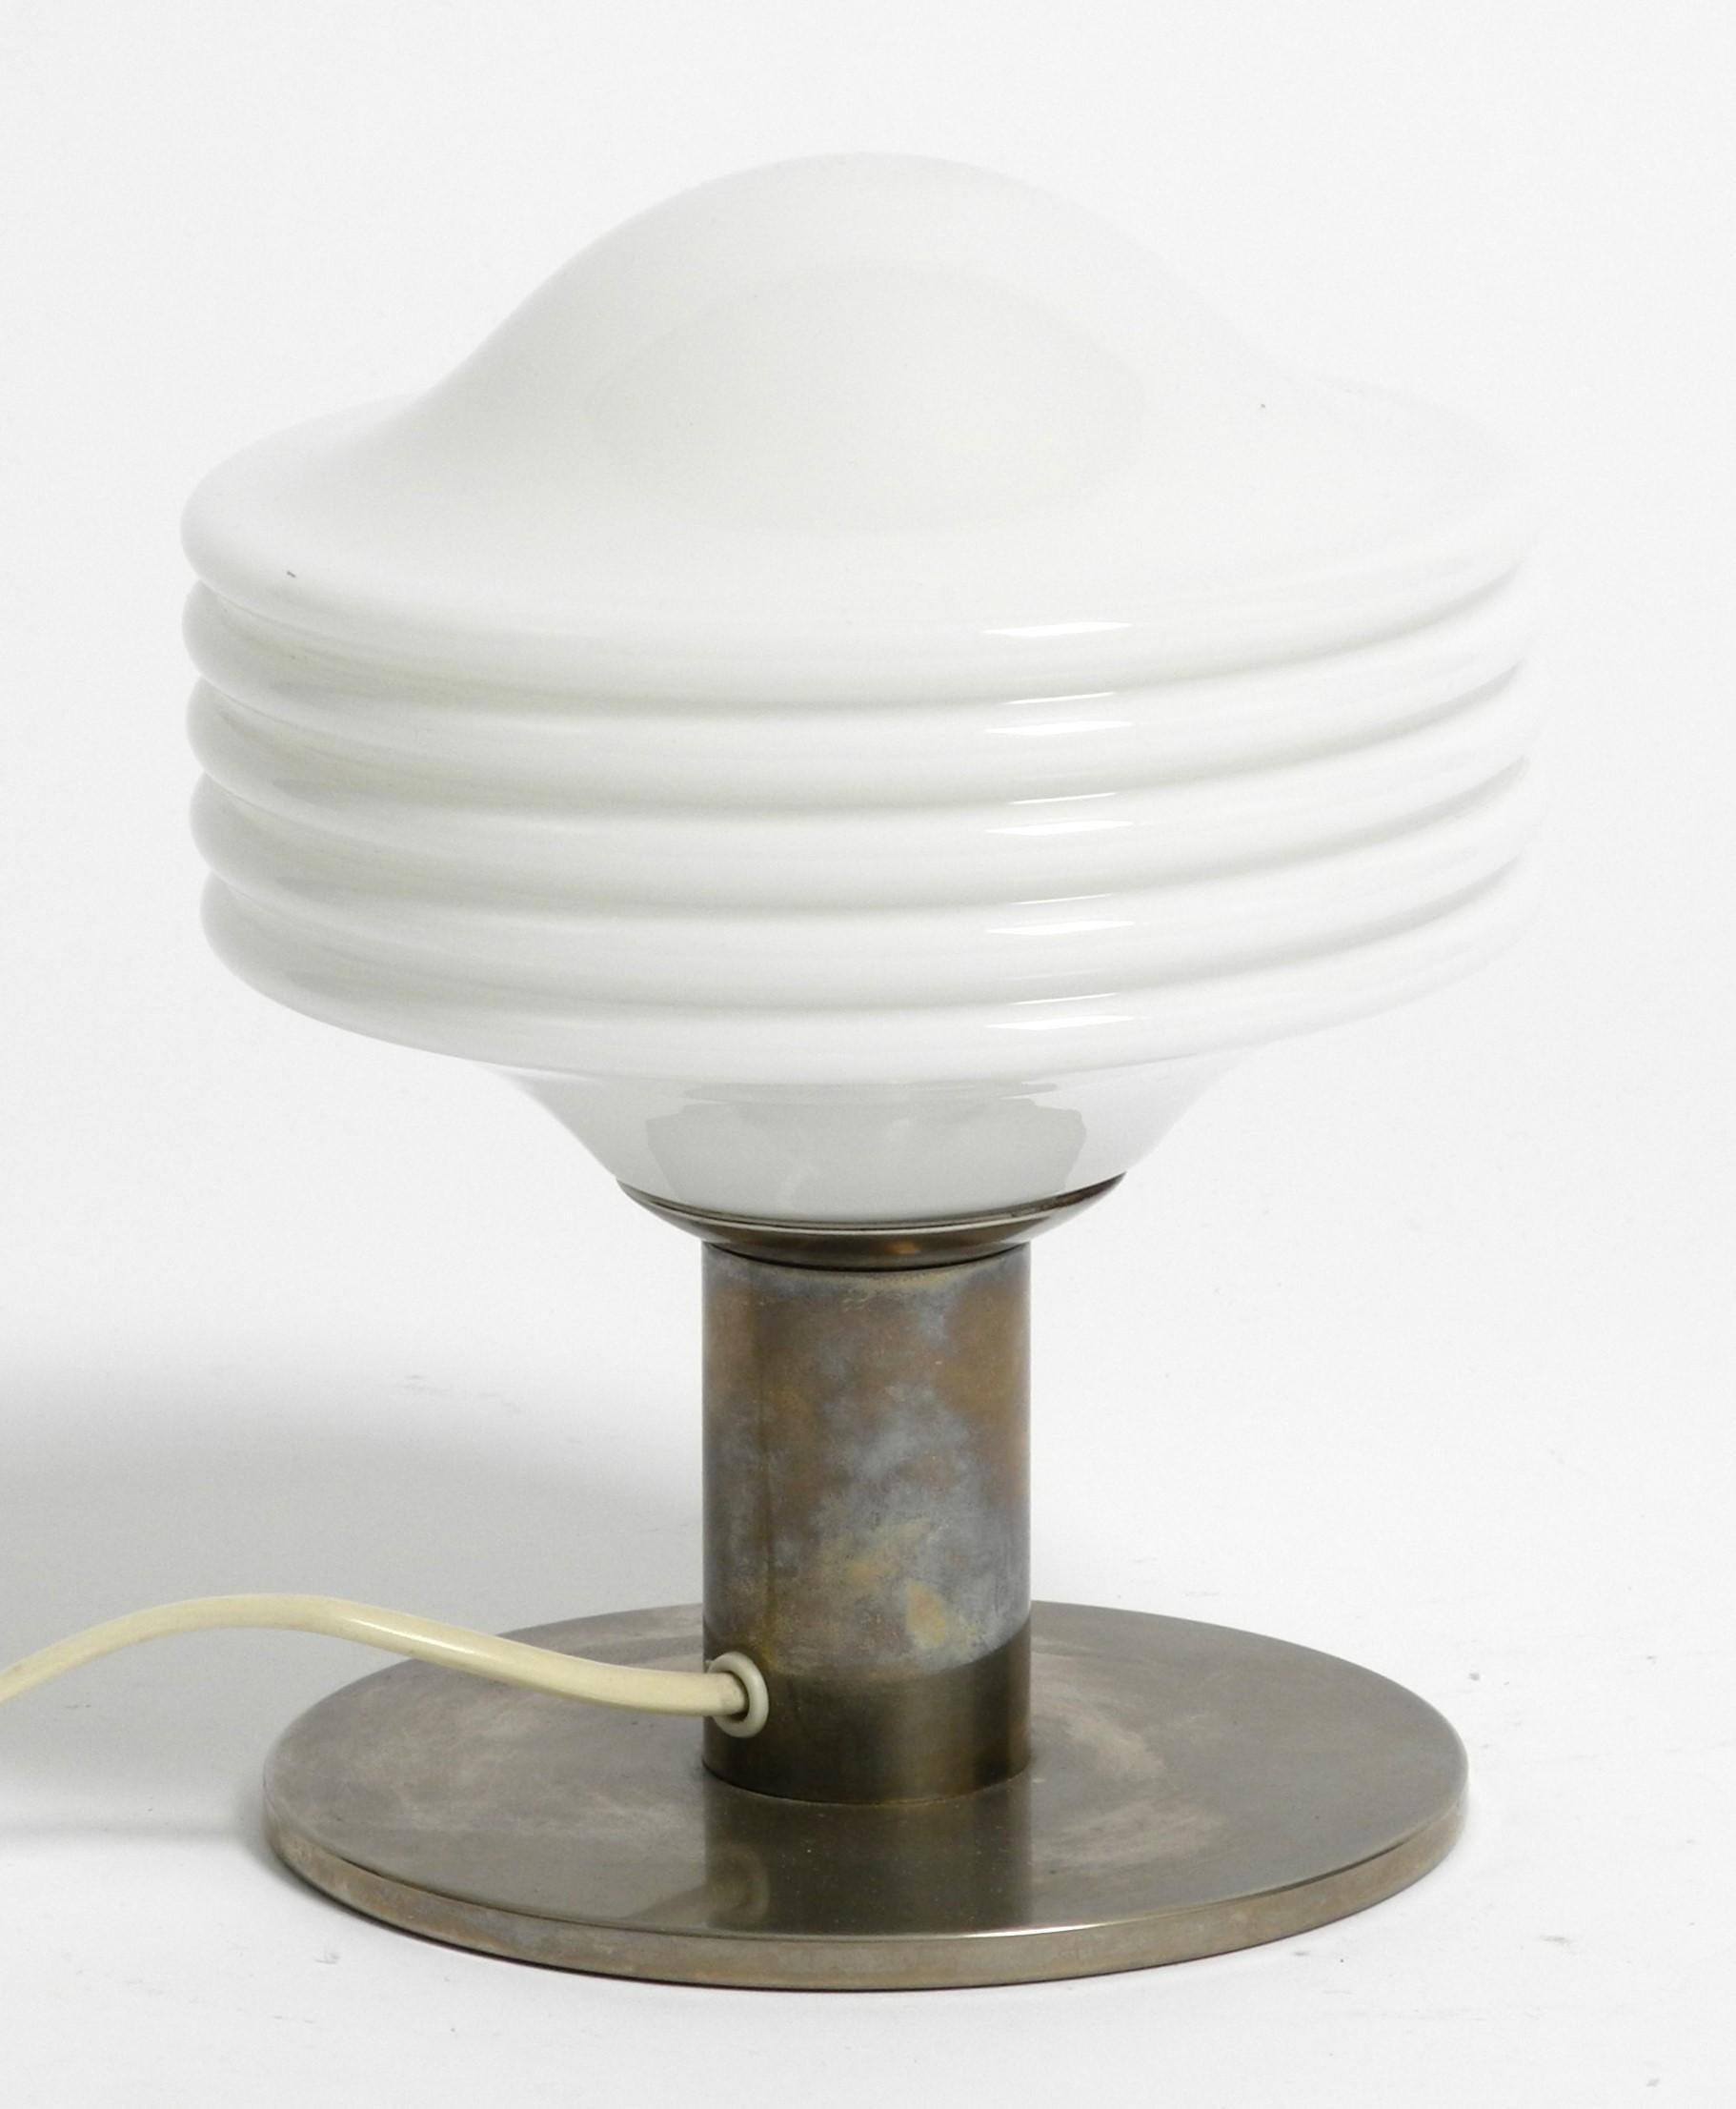 Swiss Beautyful Space Age Table Lamp by Temde with Opal Glass Shade, Switzerland 70s